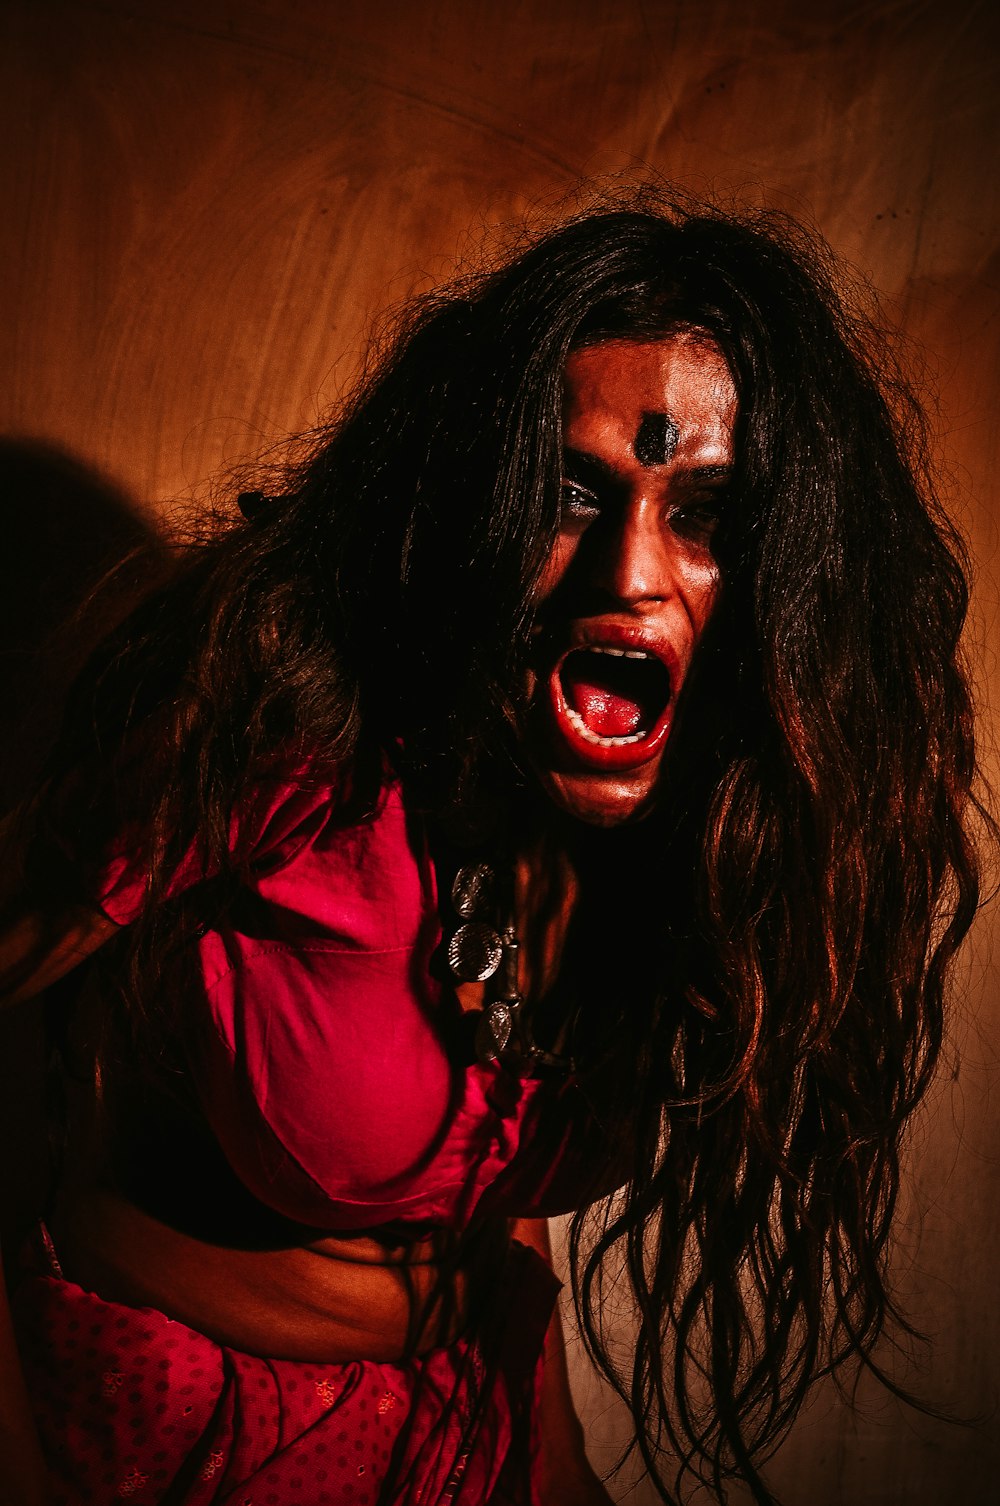 a woman with makeup and blood on her face